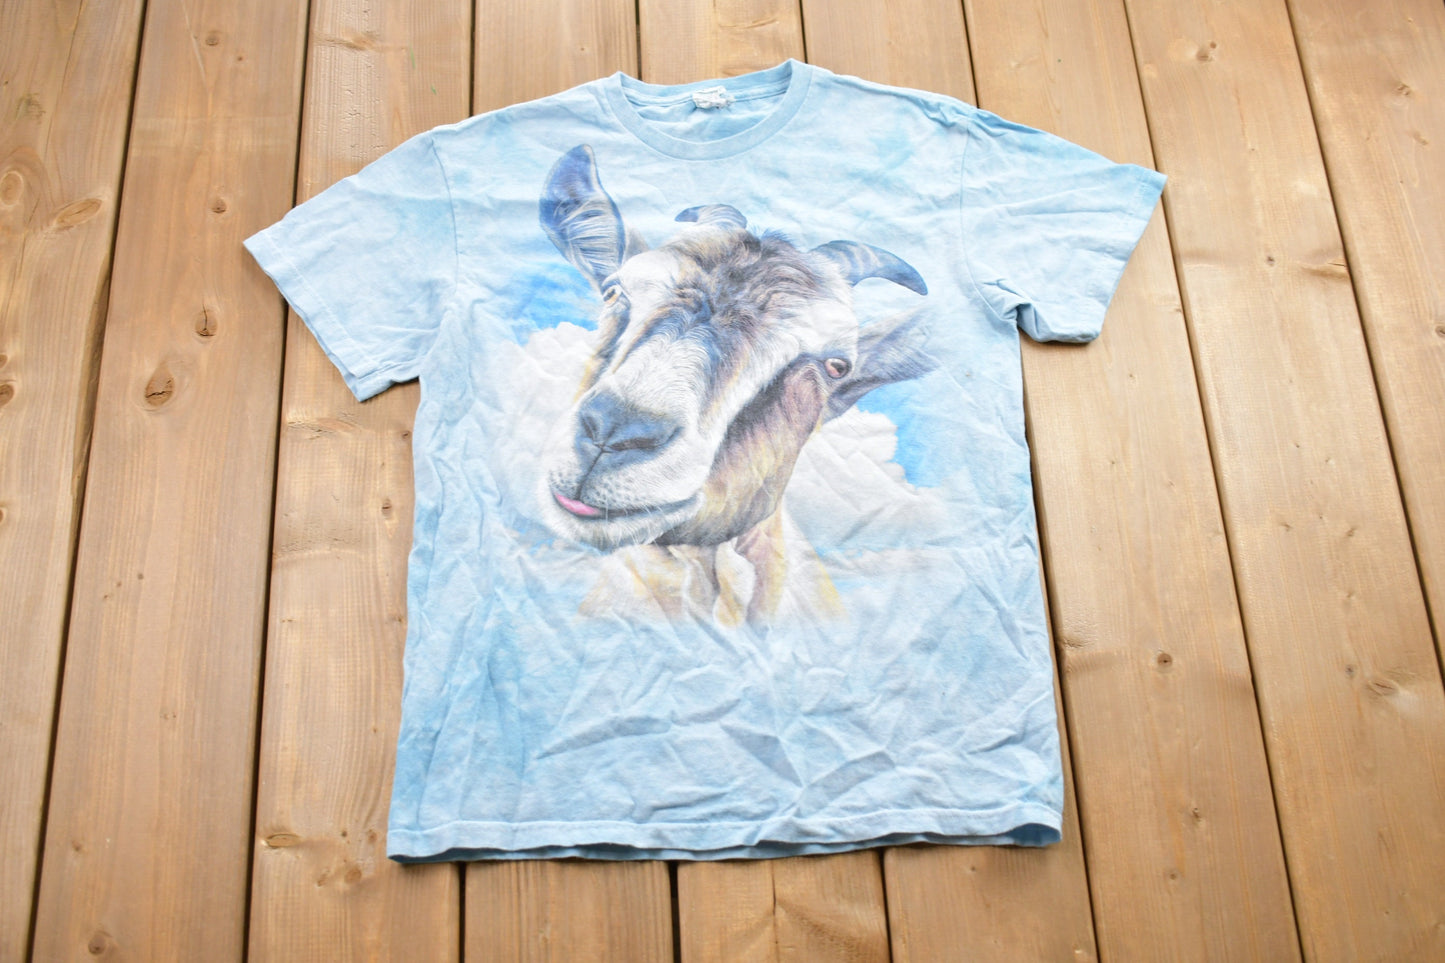 Vintage 1990s Goat Tie-dye Graphic T-Shirt / Graphic / 80s / 90s / Streetwear / Retro Style / Goat Graphic / Made In USA / Cloud T-Shirt